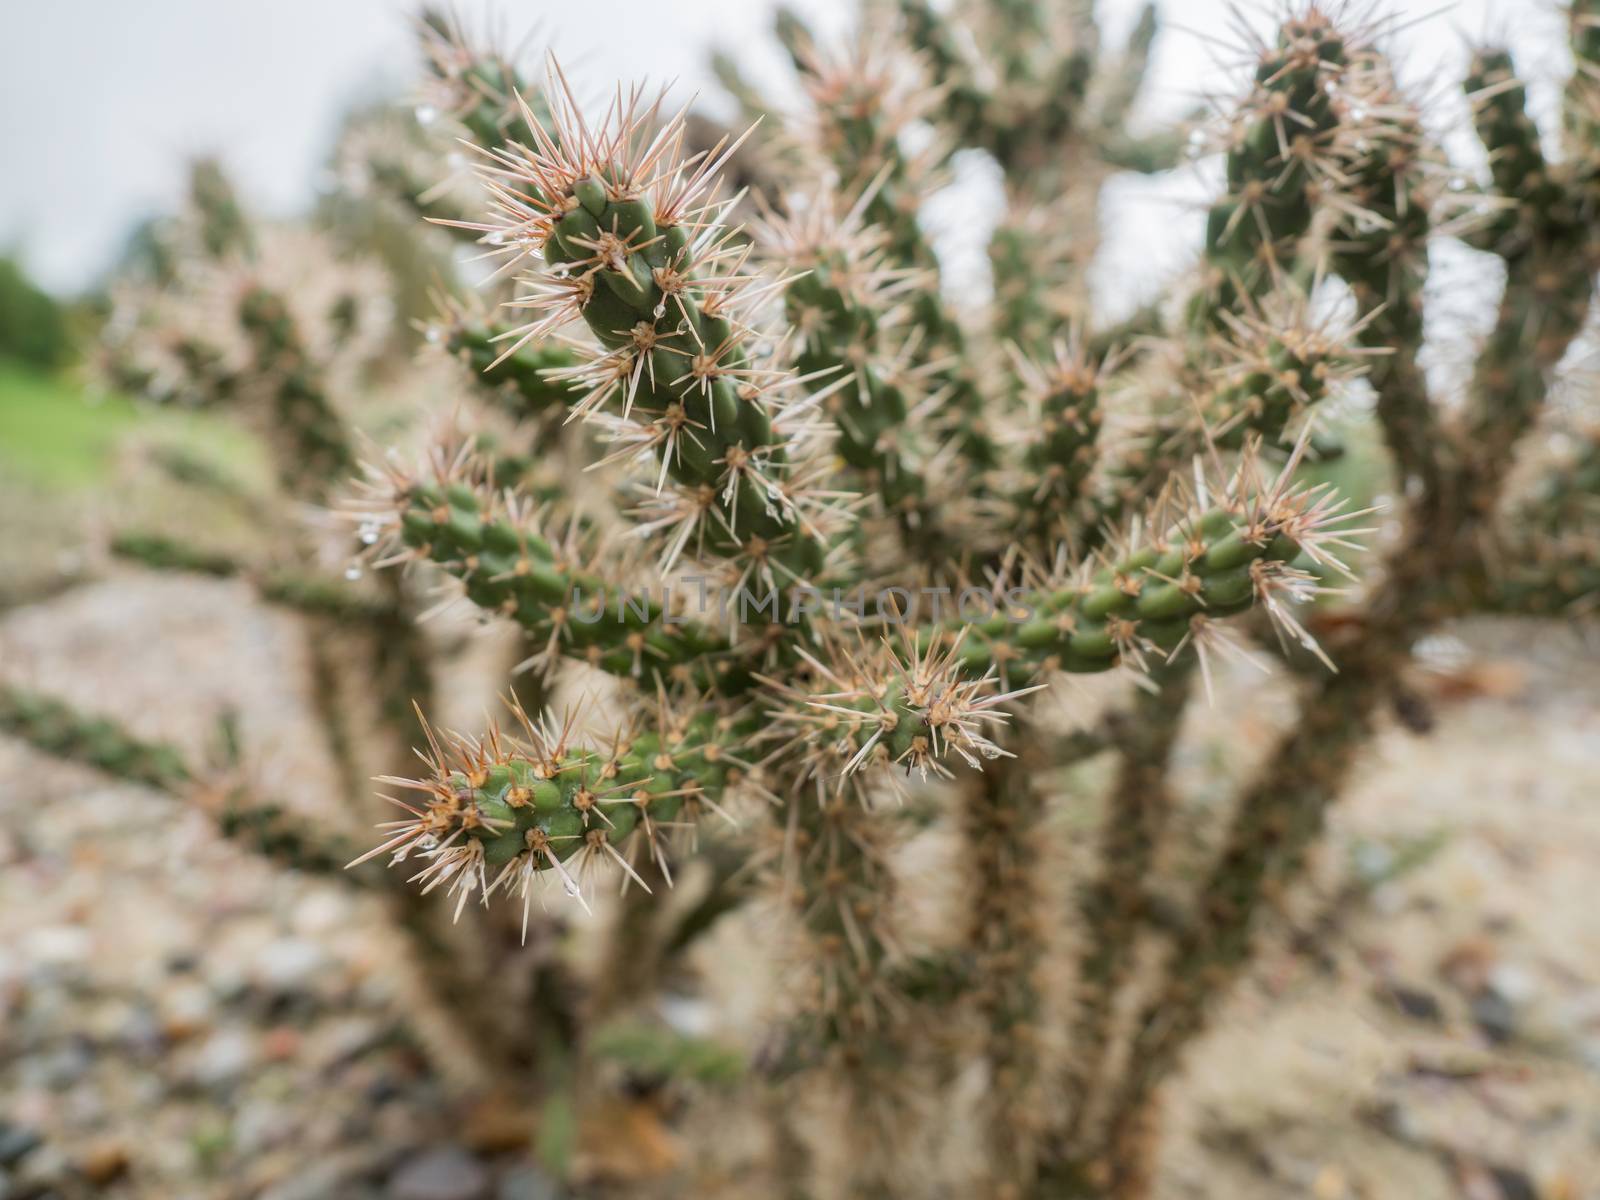 Spines of the cactus with rain drops